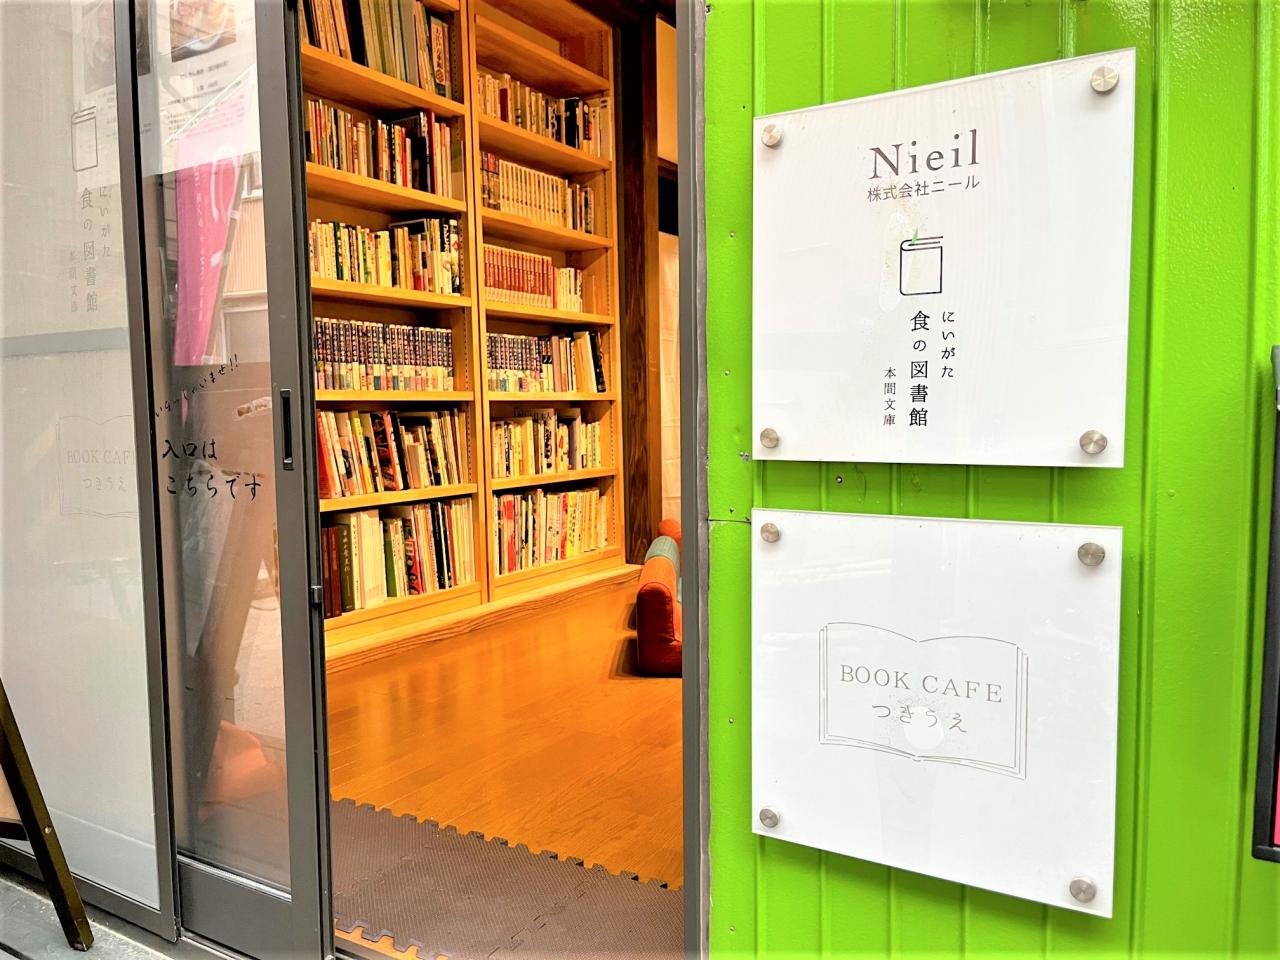  BOOK CAFE つきうえ